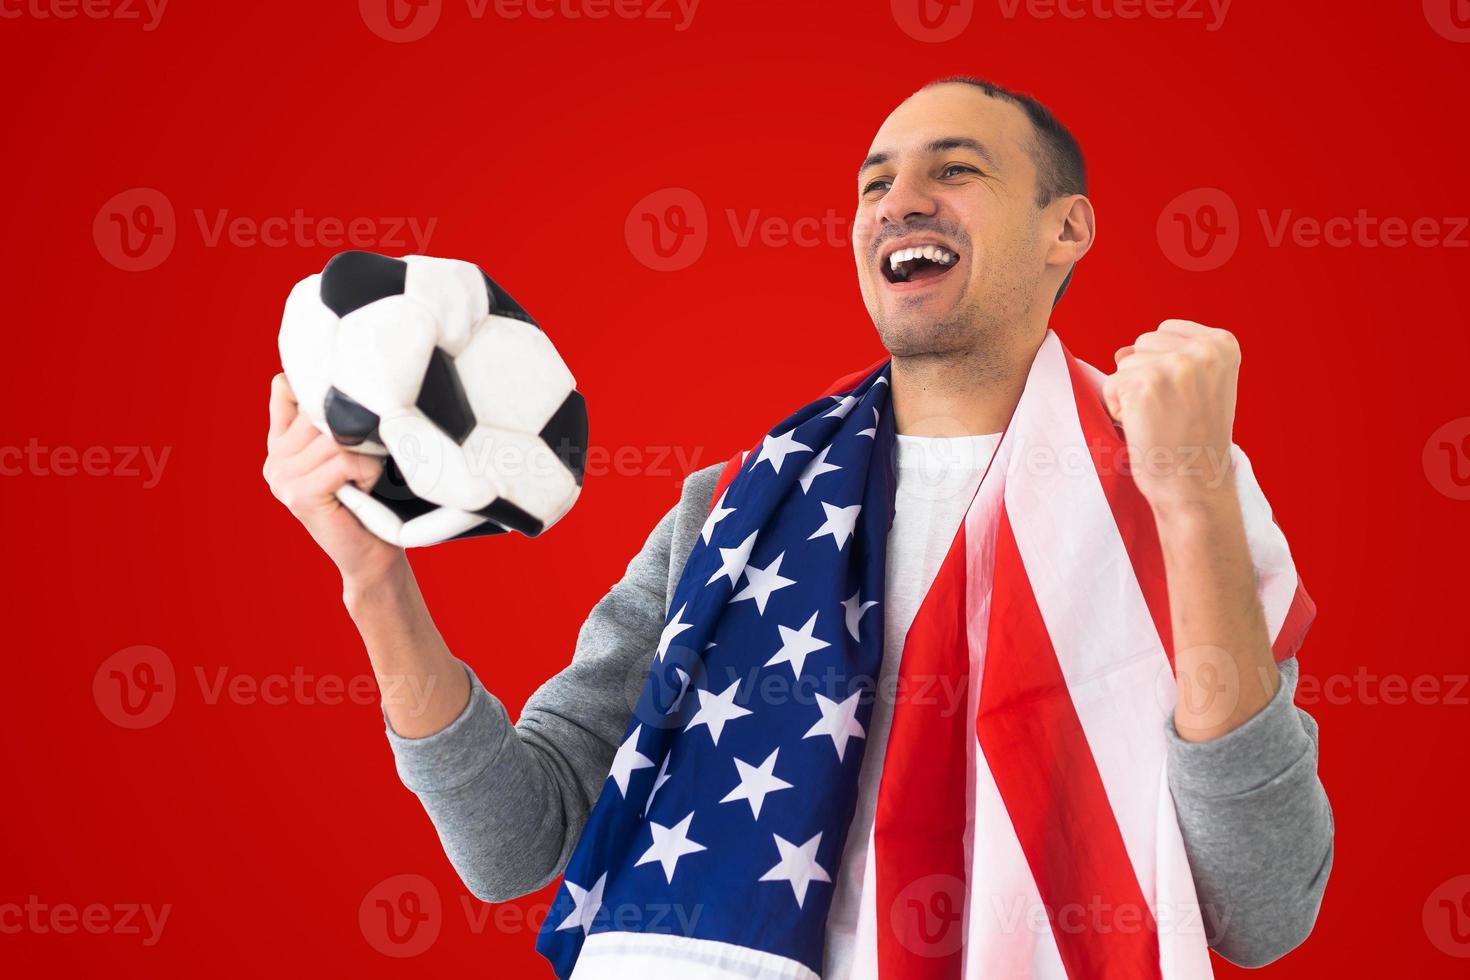 football fan with a deformed crumpled ball and an American flag photo